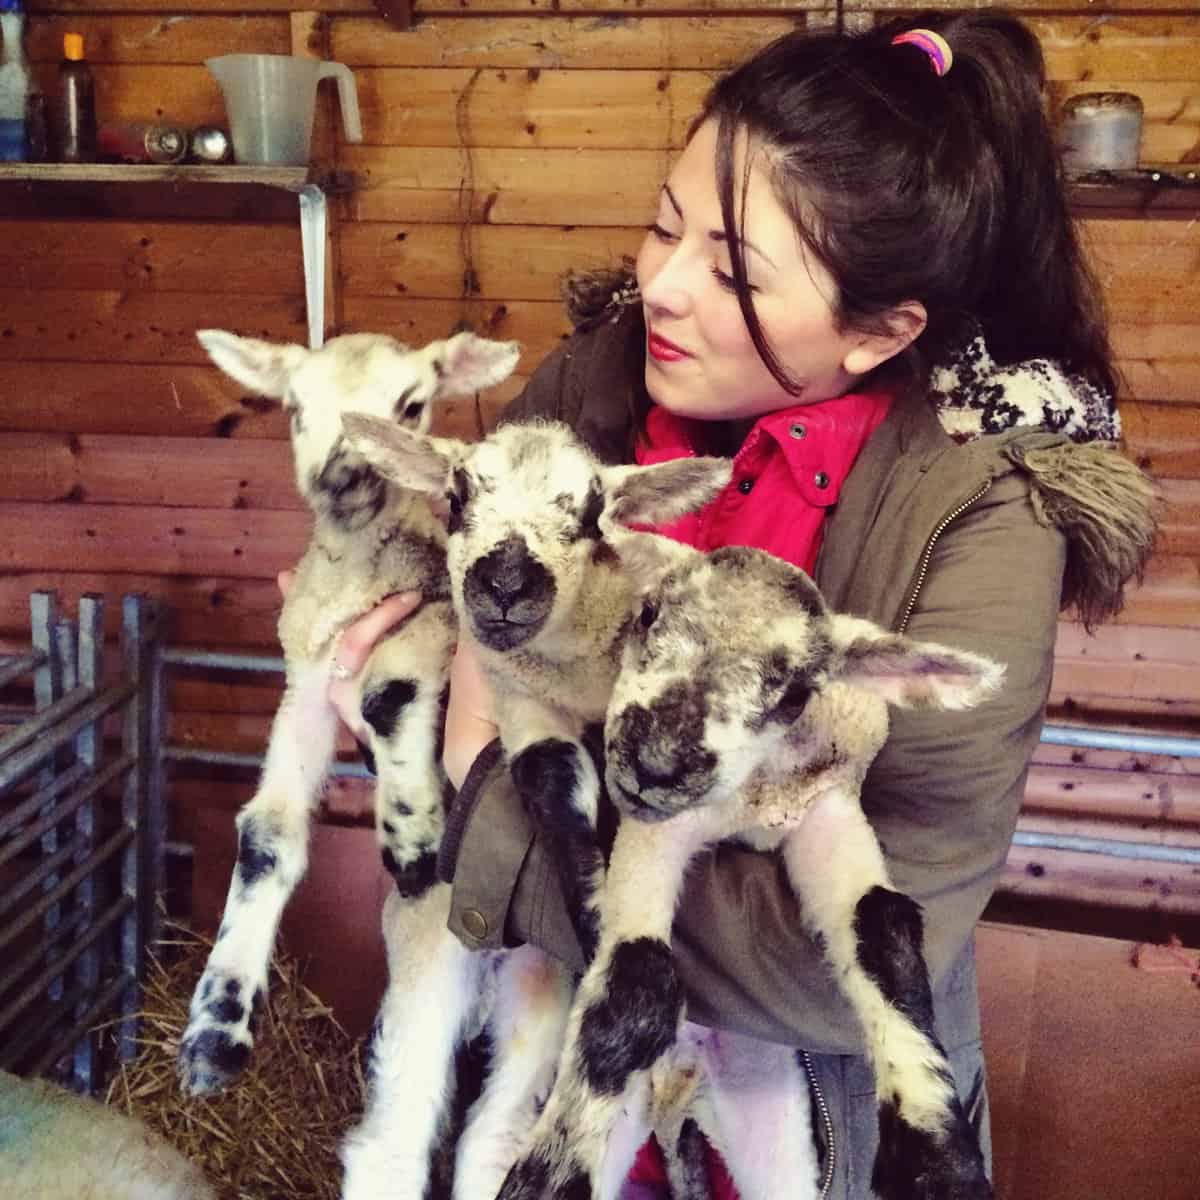 'Team photo'! We brought the triplets into our garden as they were weak and it was cold. I love having cuddles in the garden shed.